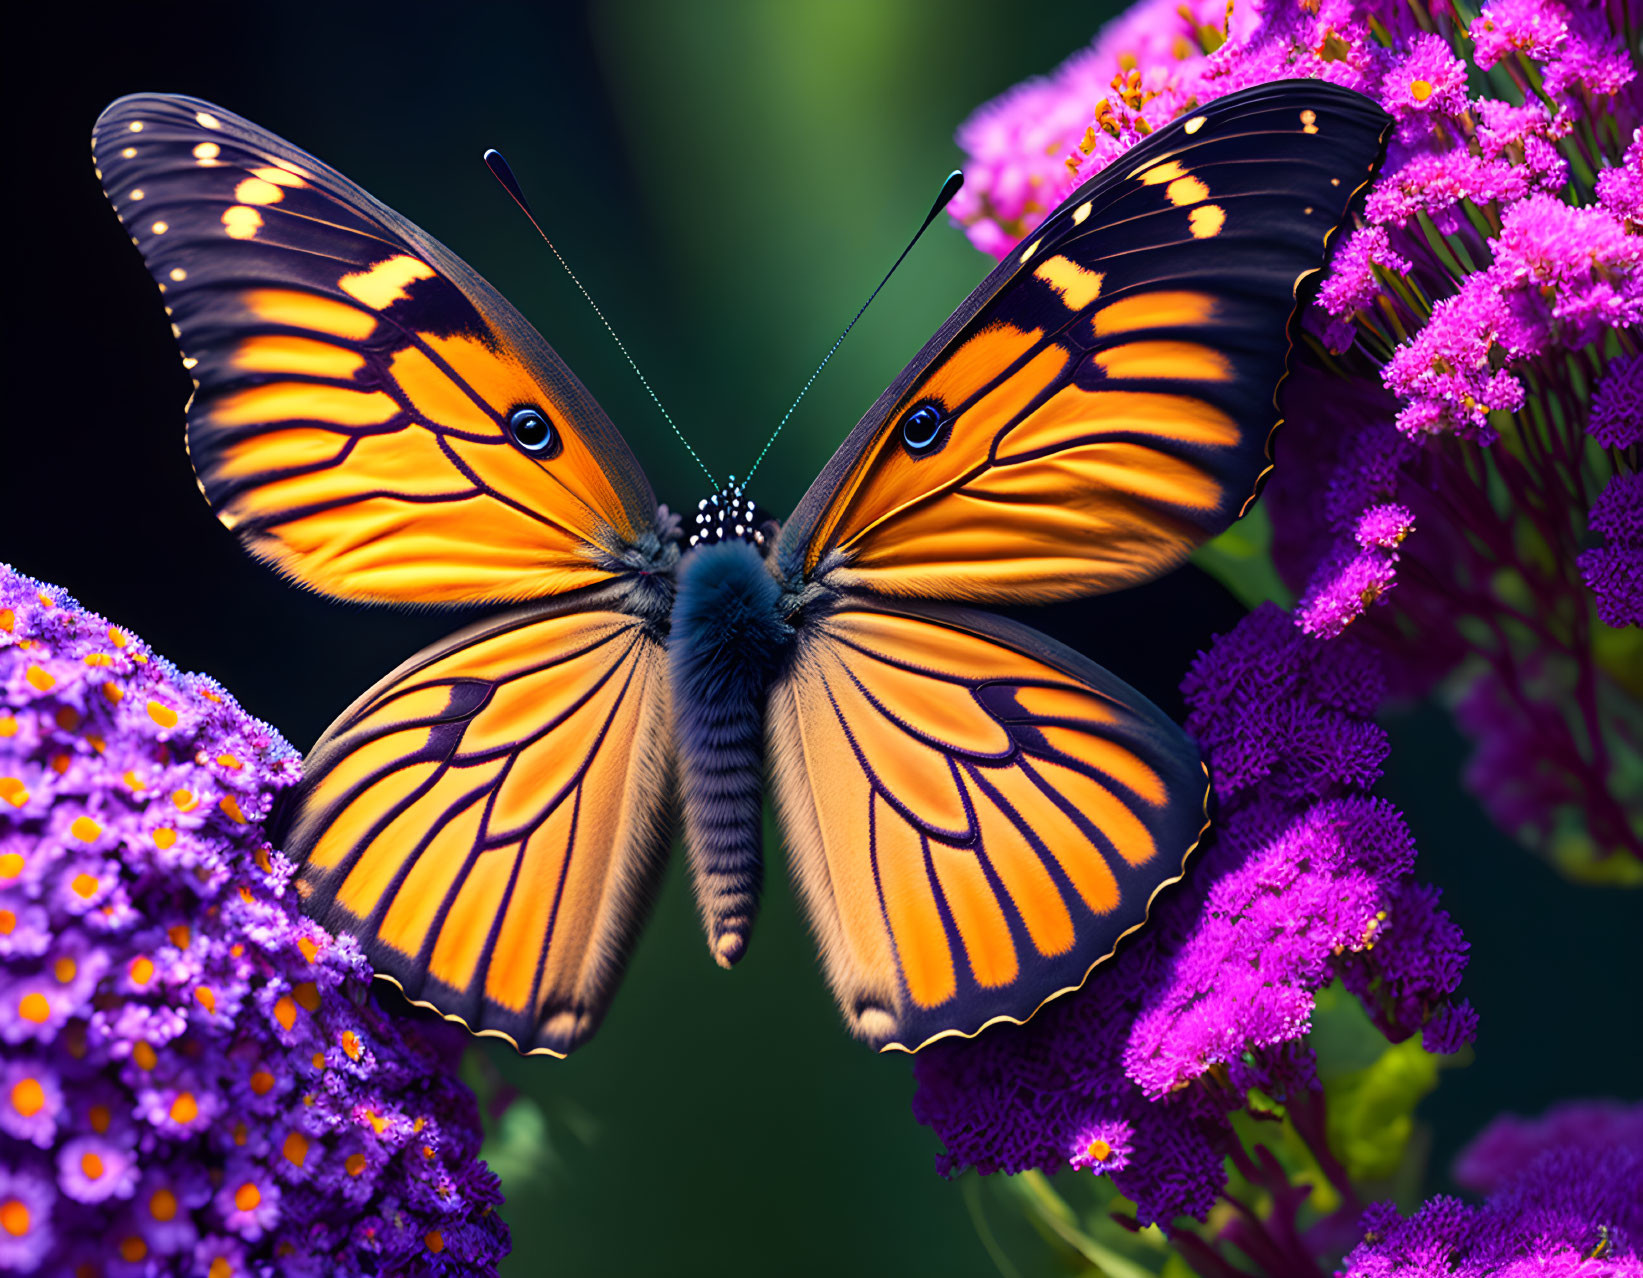 Colorful Butterfly on Purple Flowers with Green Background